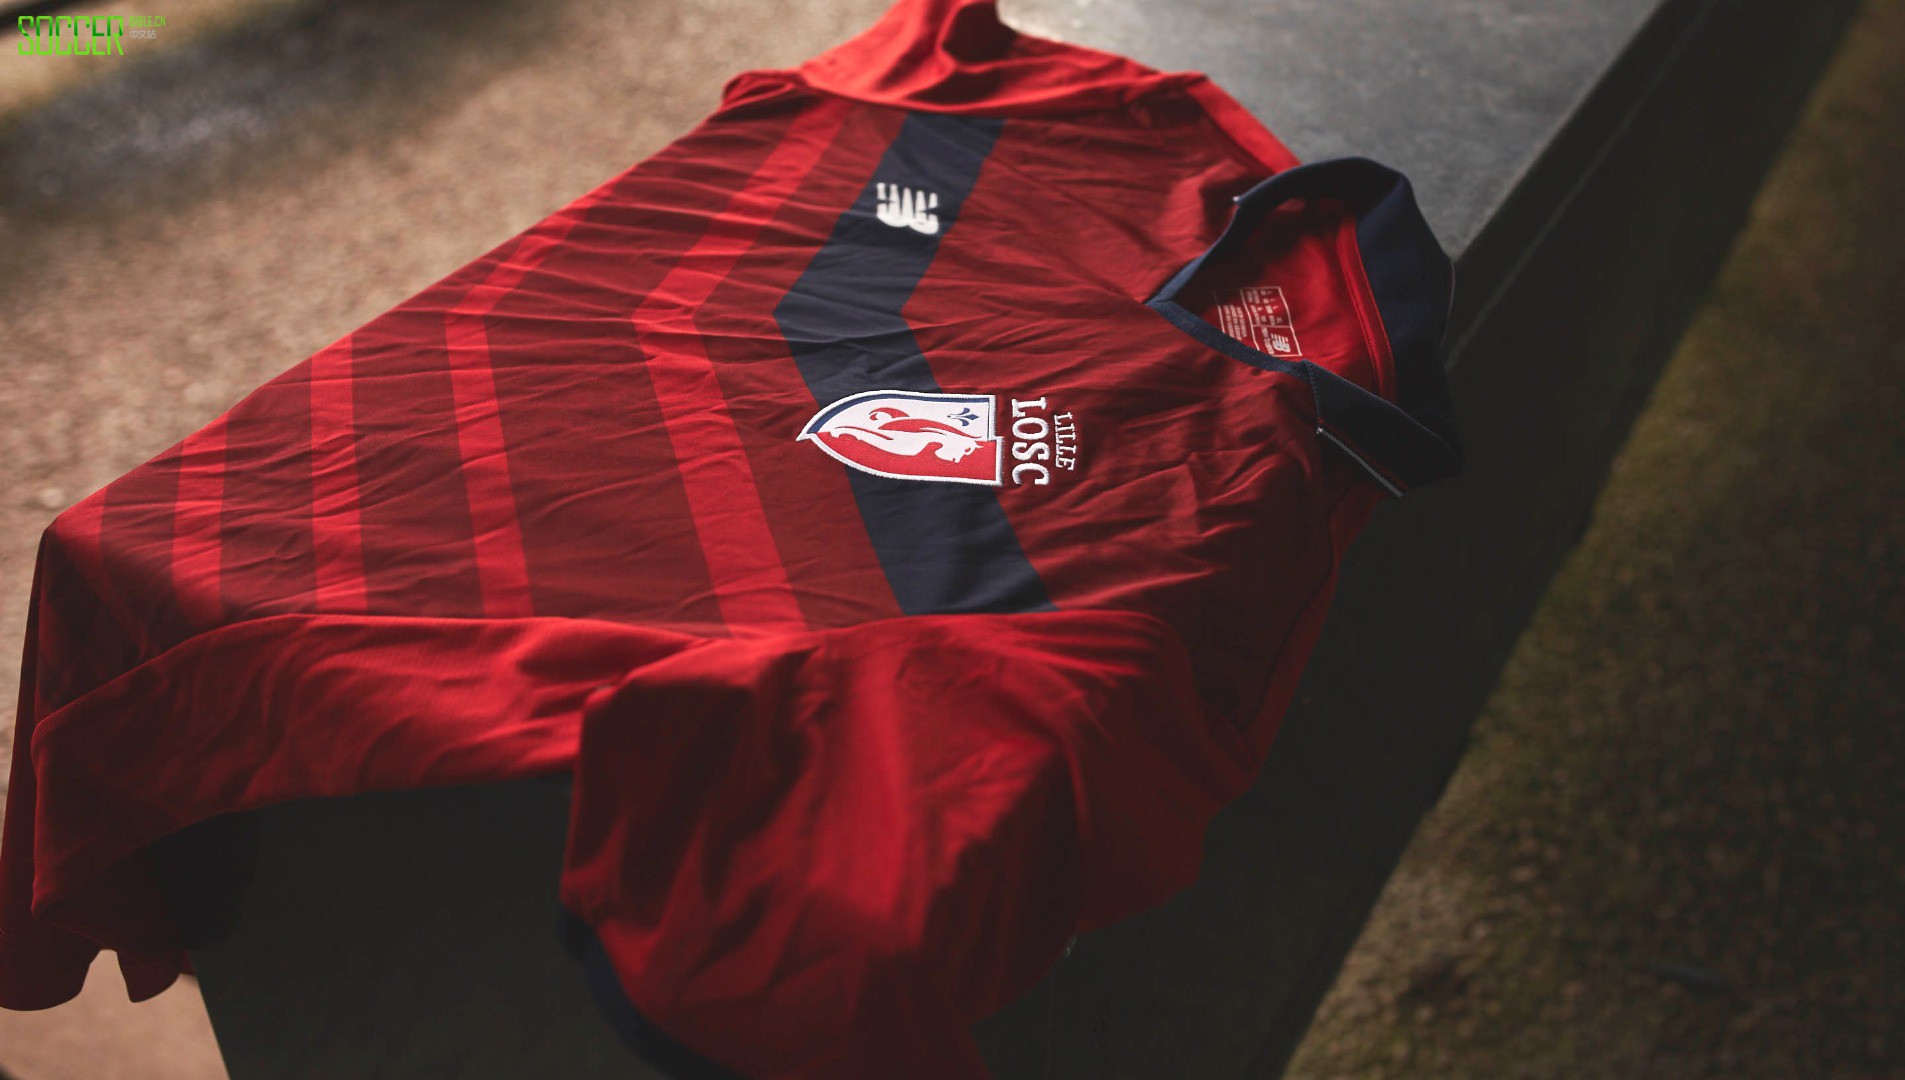 LOSC Lille 2016/17 home kits by New Balance : Football Apparel : Soccer Bible